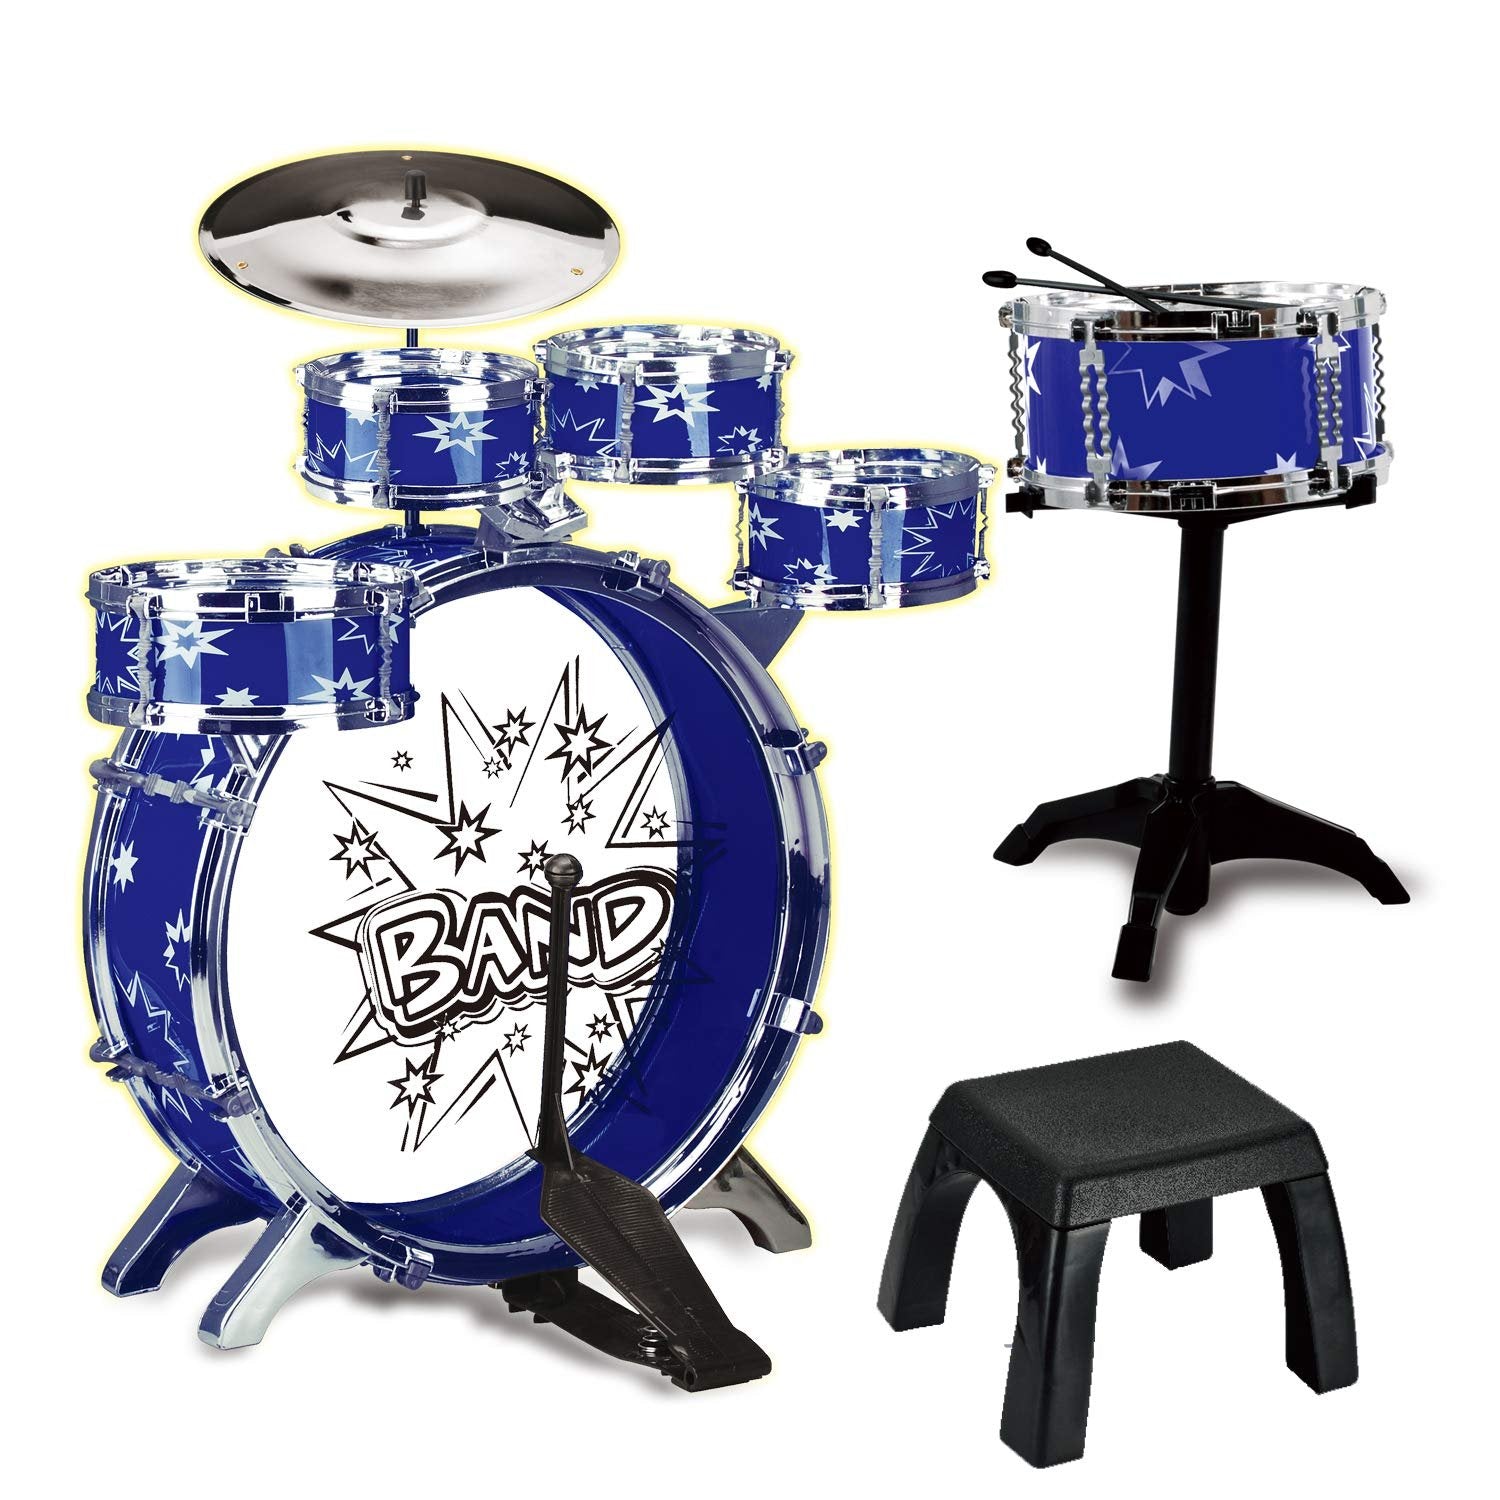 12 Piece Kids Jazz Drum Set - 6 Drums, Cymbal, Chair, Kick Pedal, 2 Drumsticks, Stool. Ideal Gift Toy for Kids, Boys & Girls